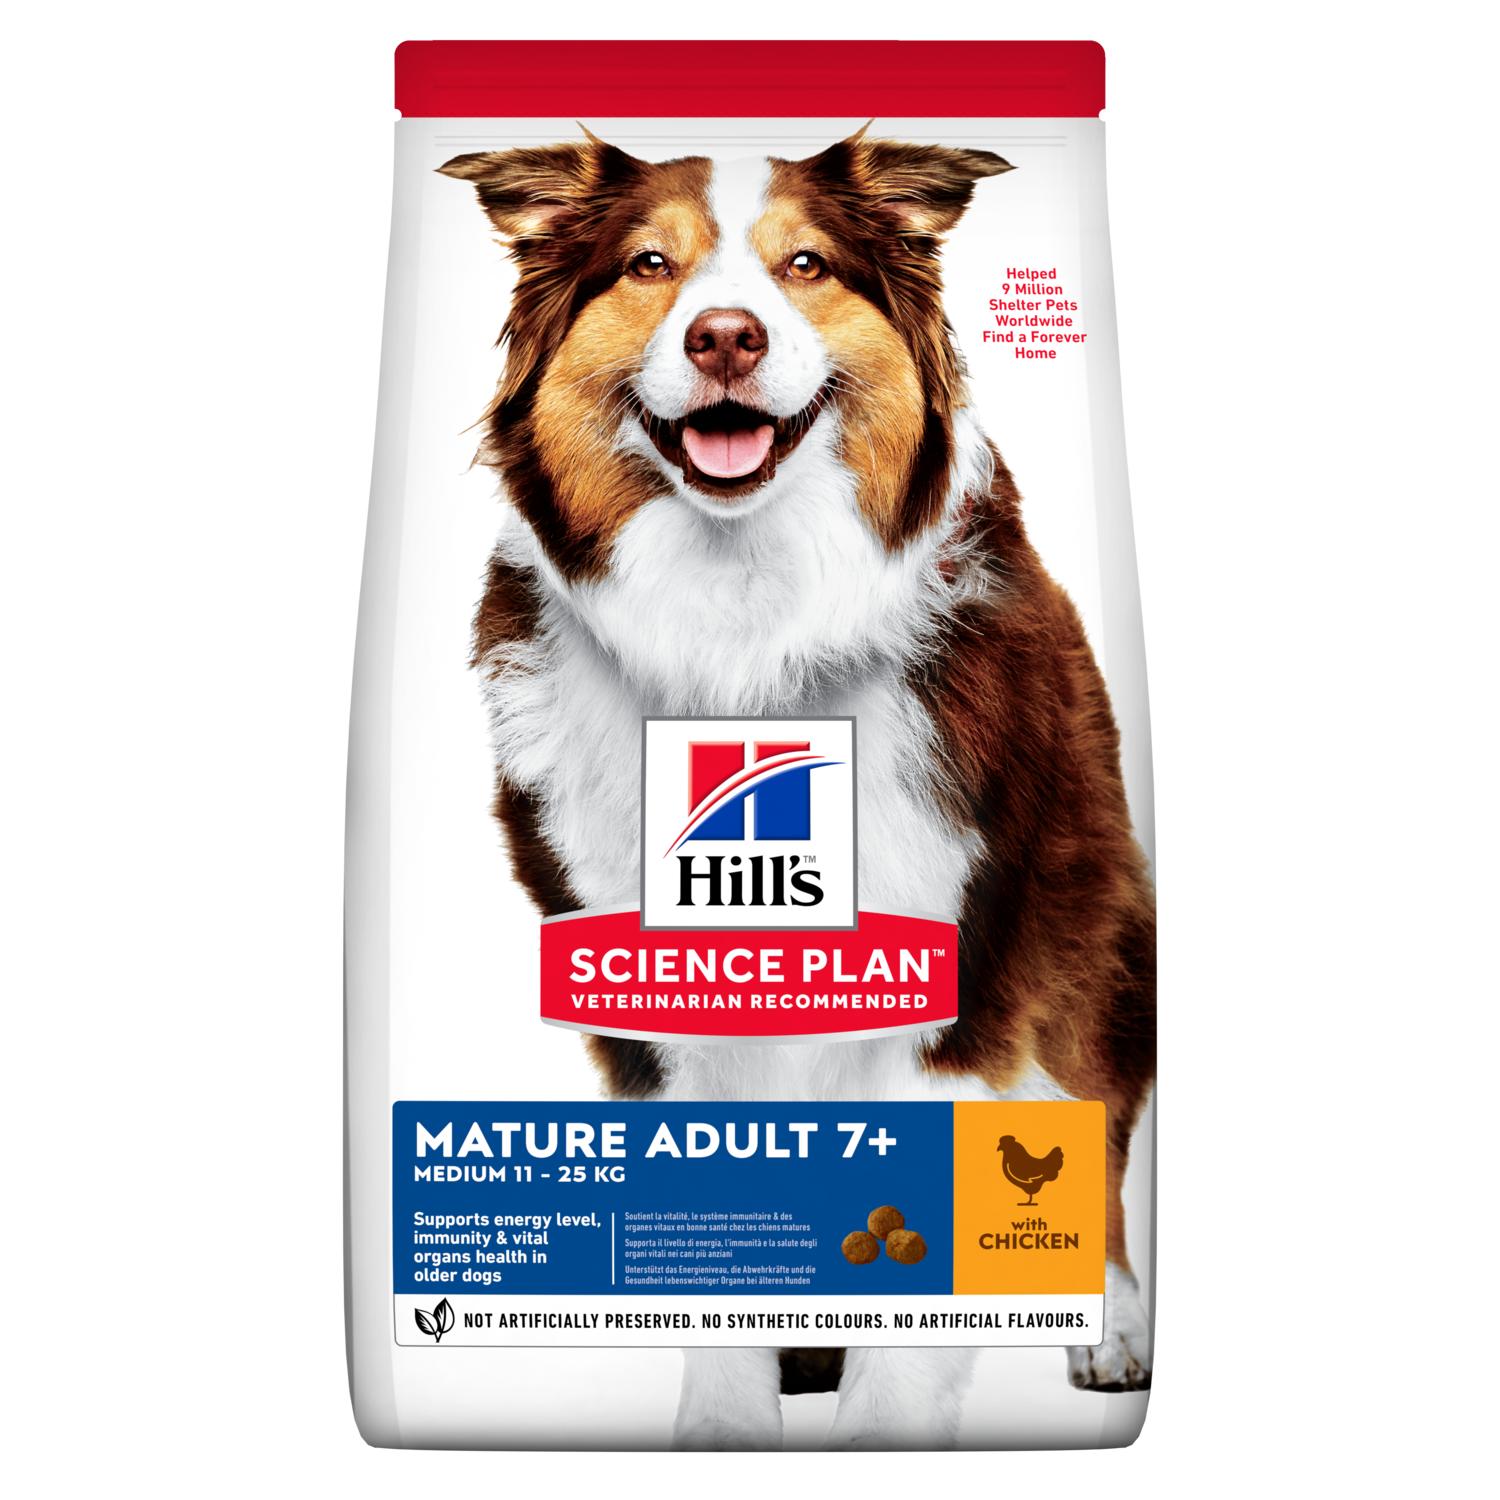 Hill's Science Plan Mature Adult7+ Chicken 